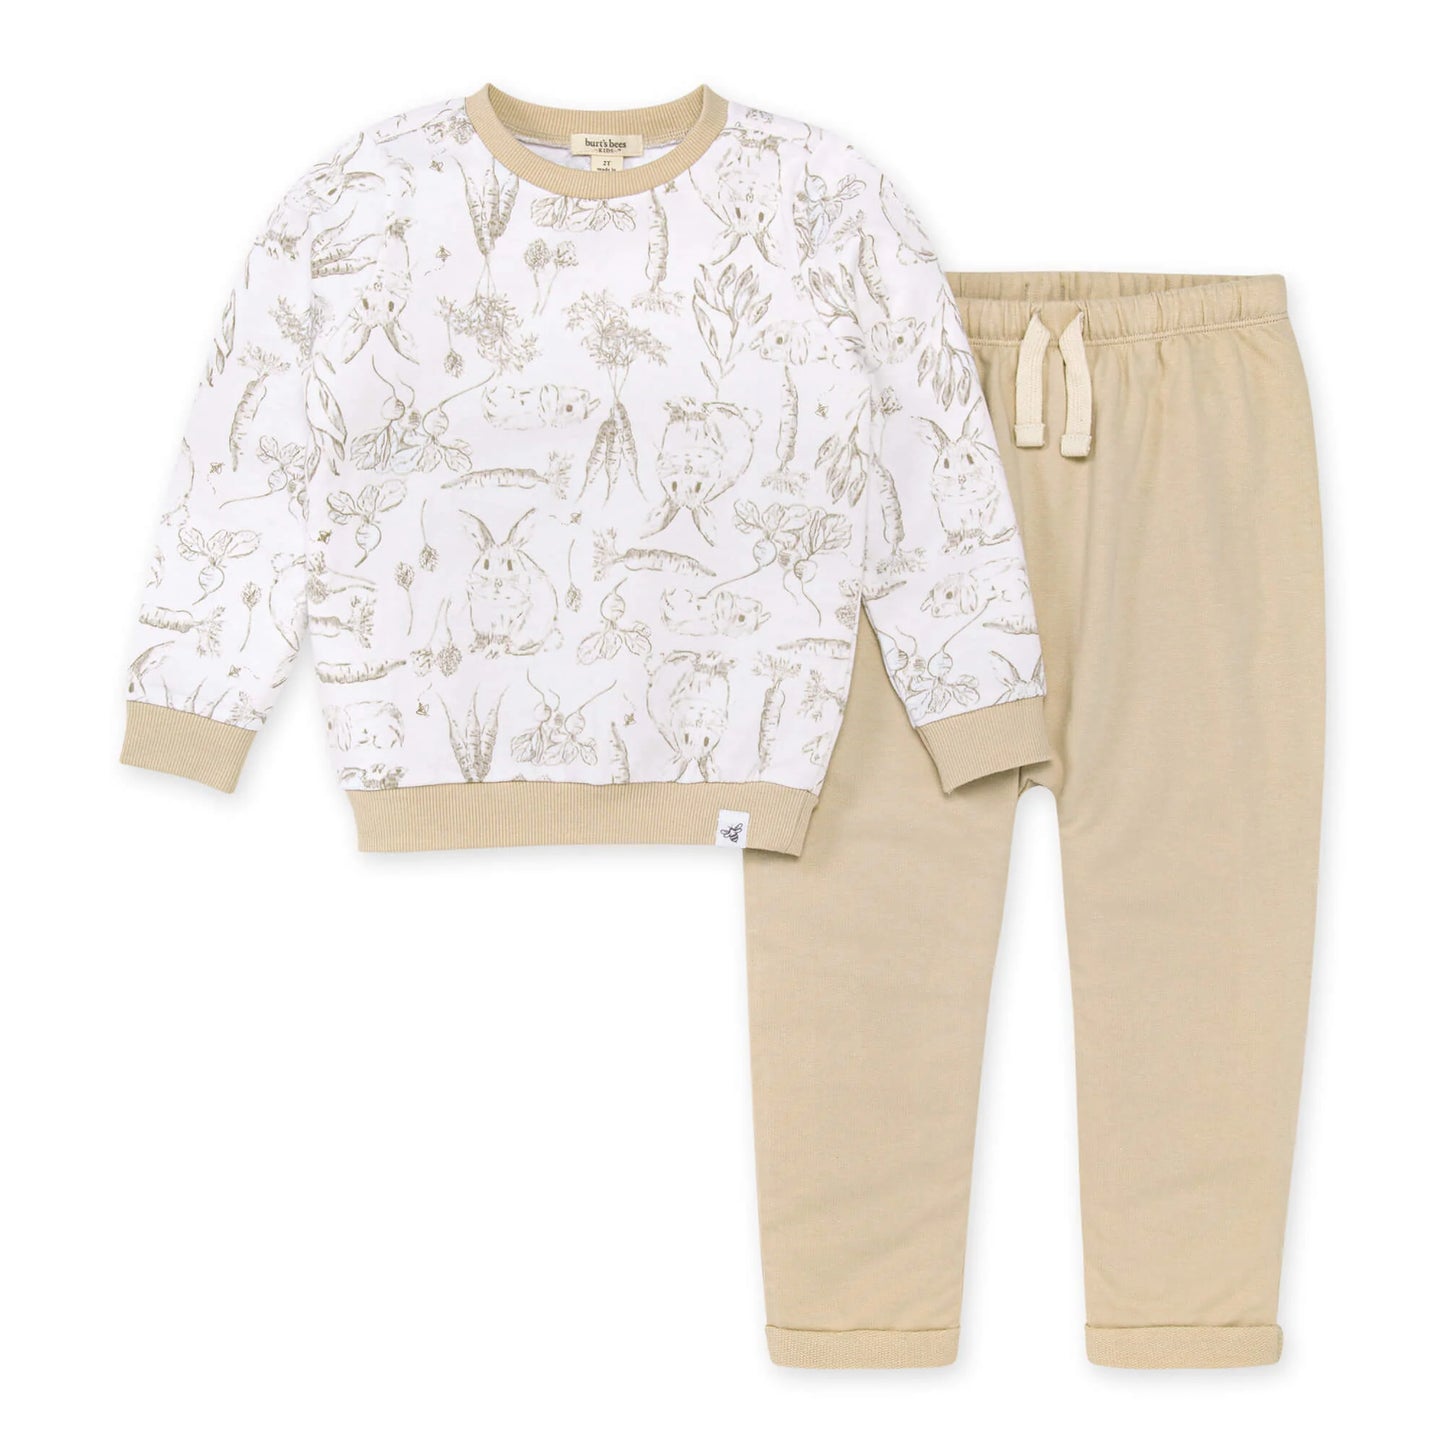 Burt's Bees Bunny French Terry Top & Pant Set